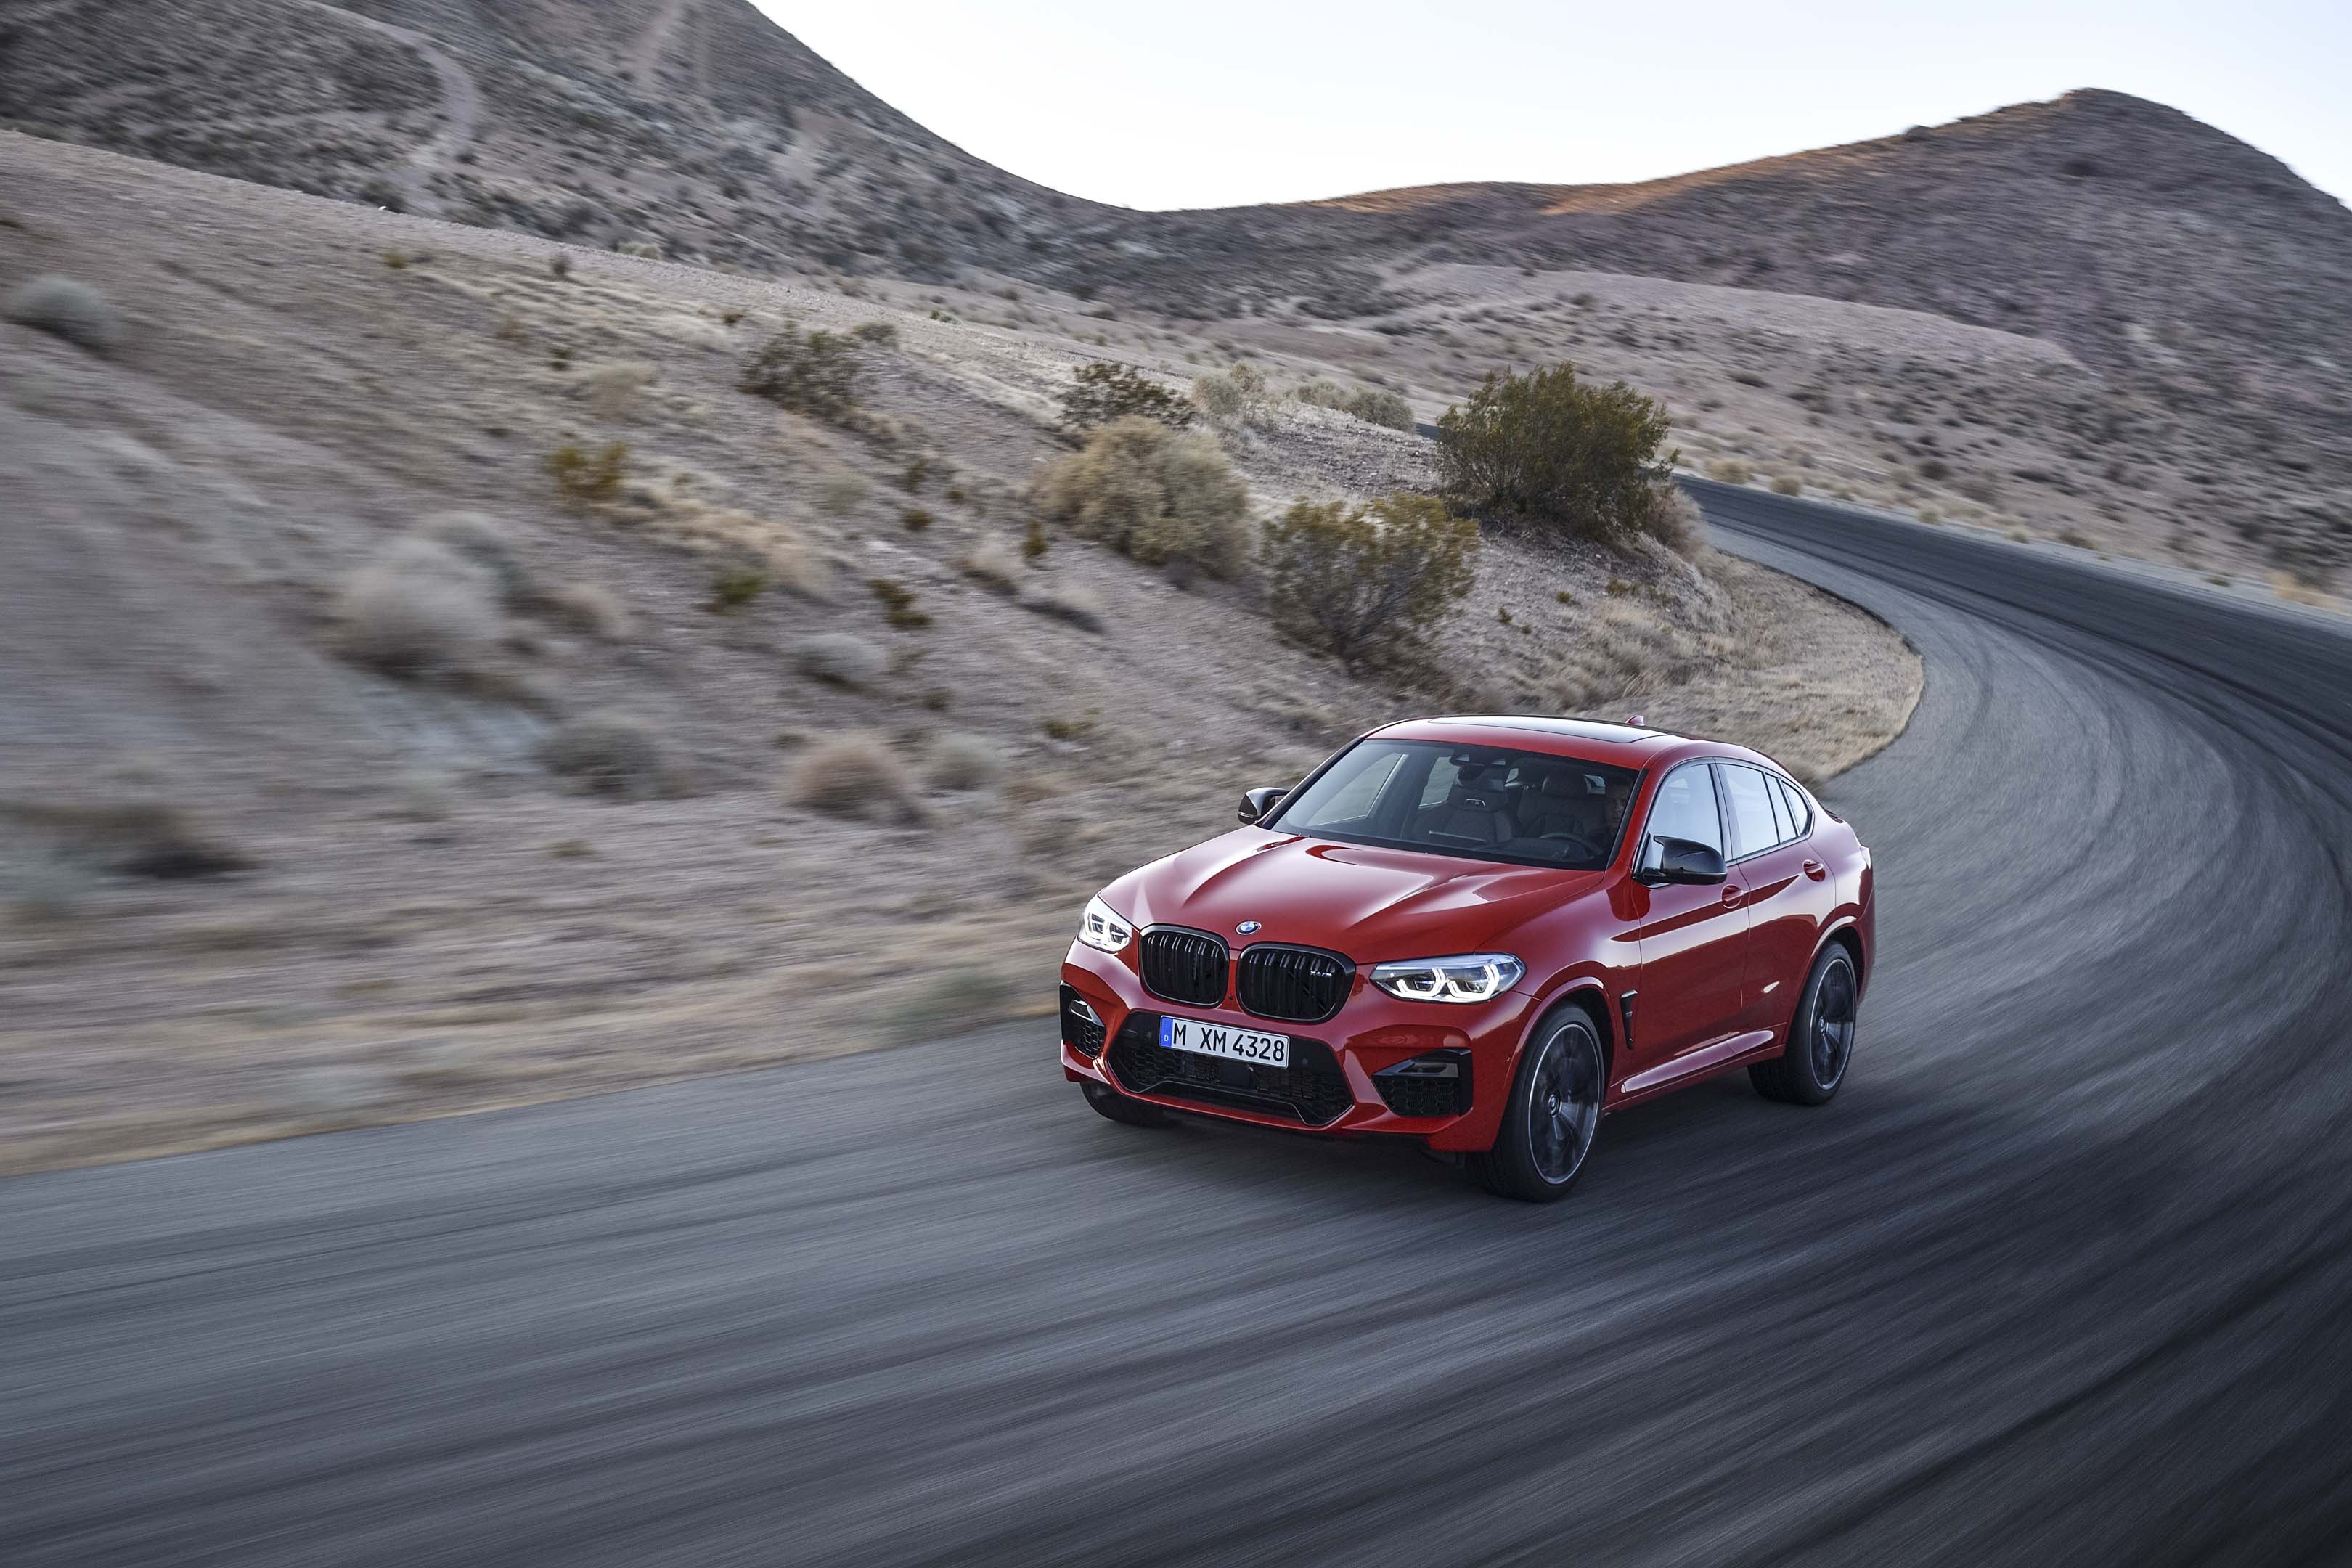 Wallpaper Of The Day: 2020 BMW X4M